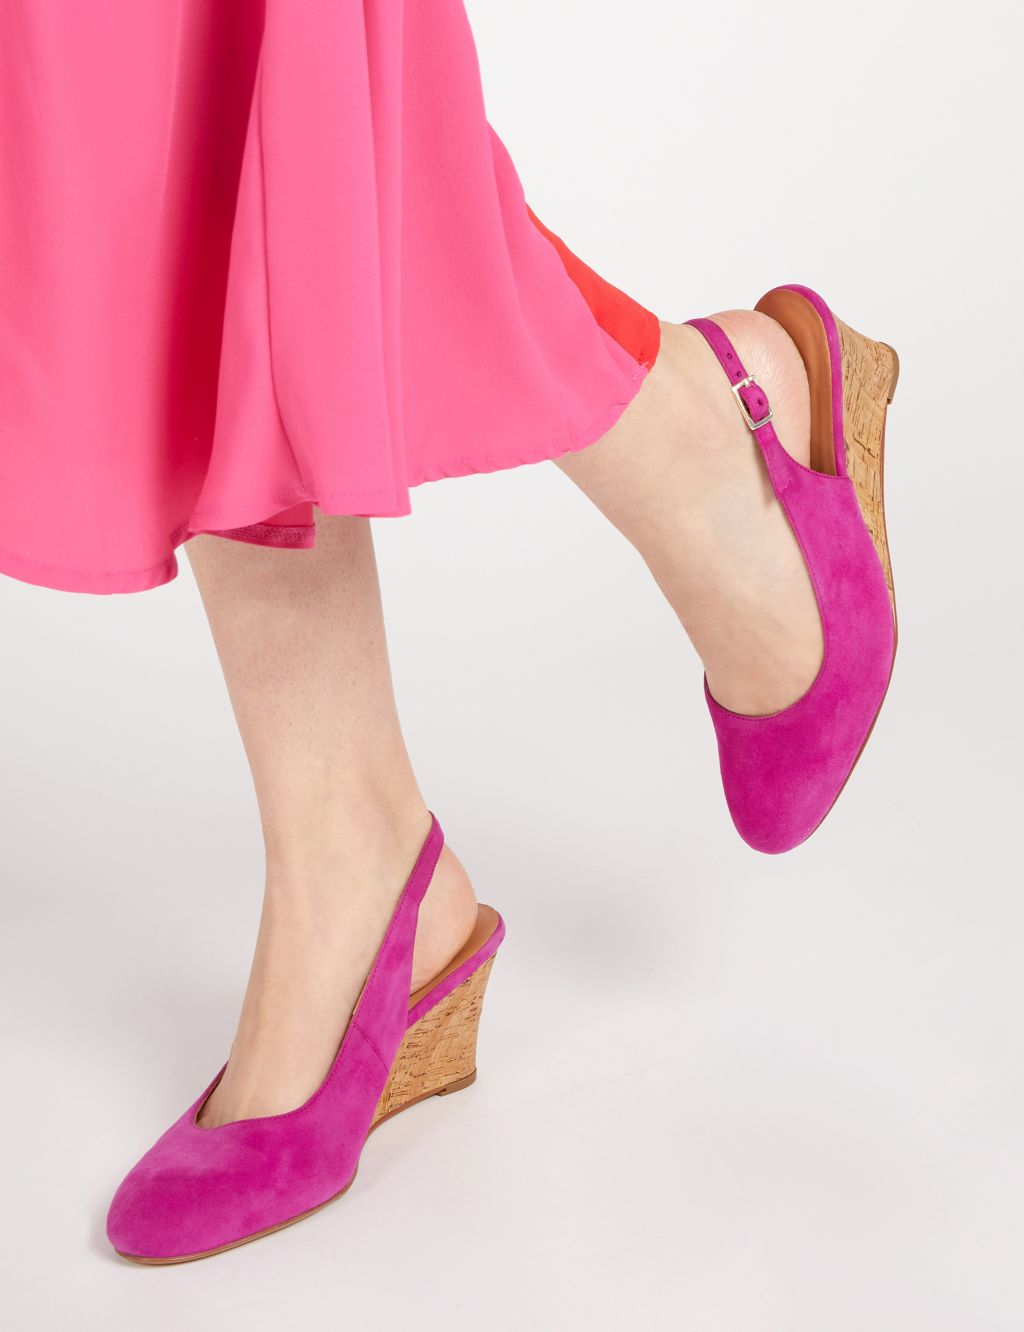 Suede Wedge Slingback Shoes image 1